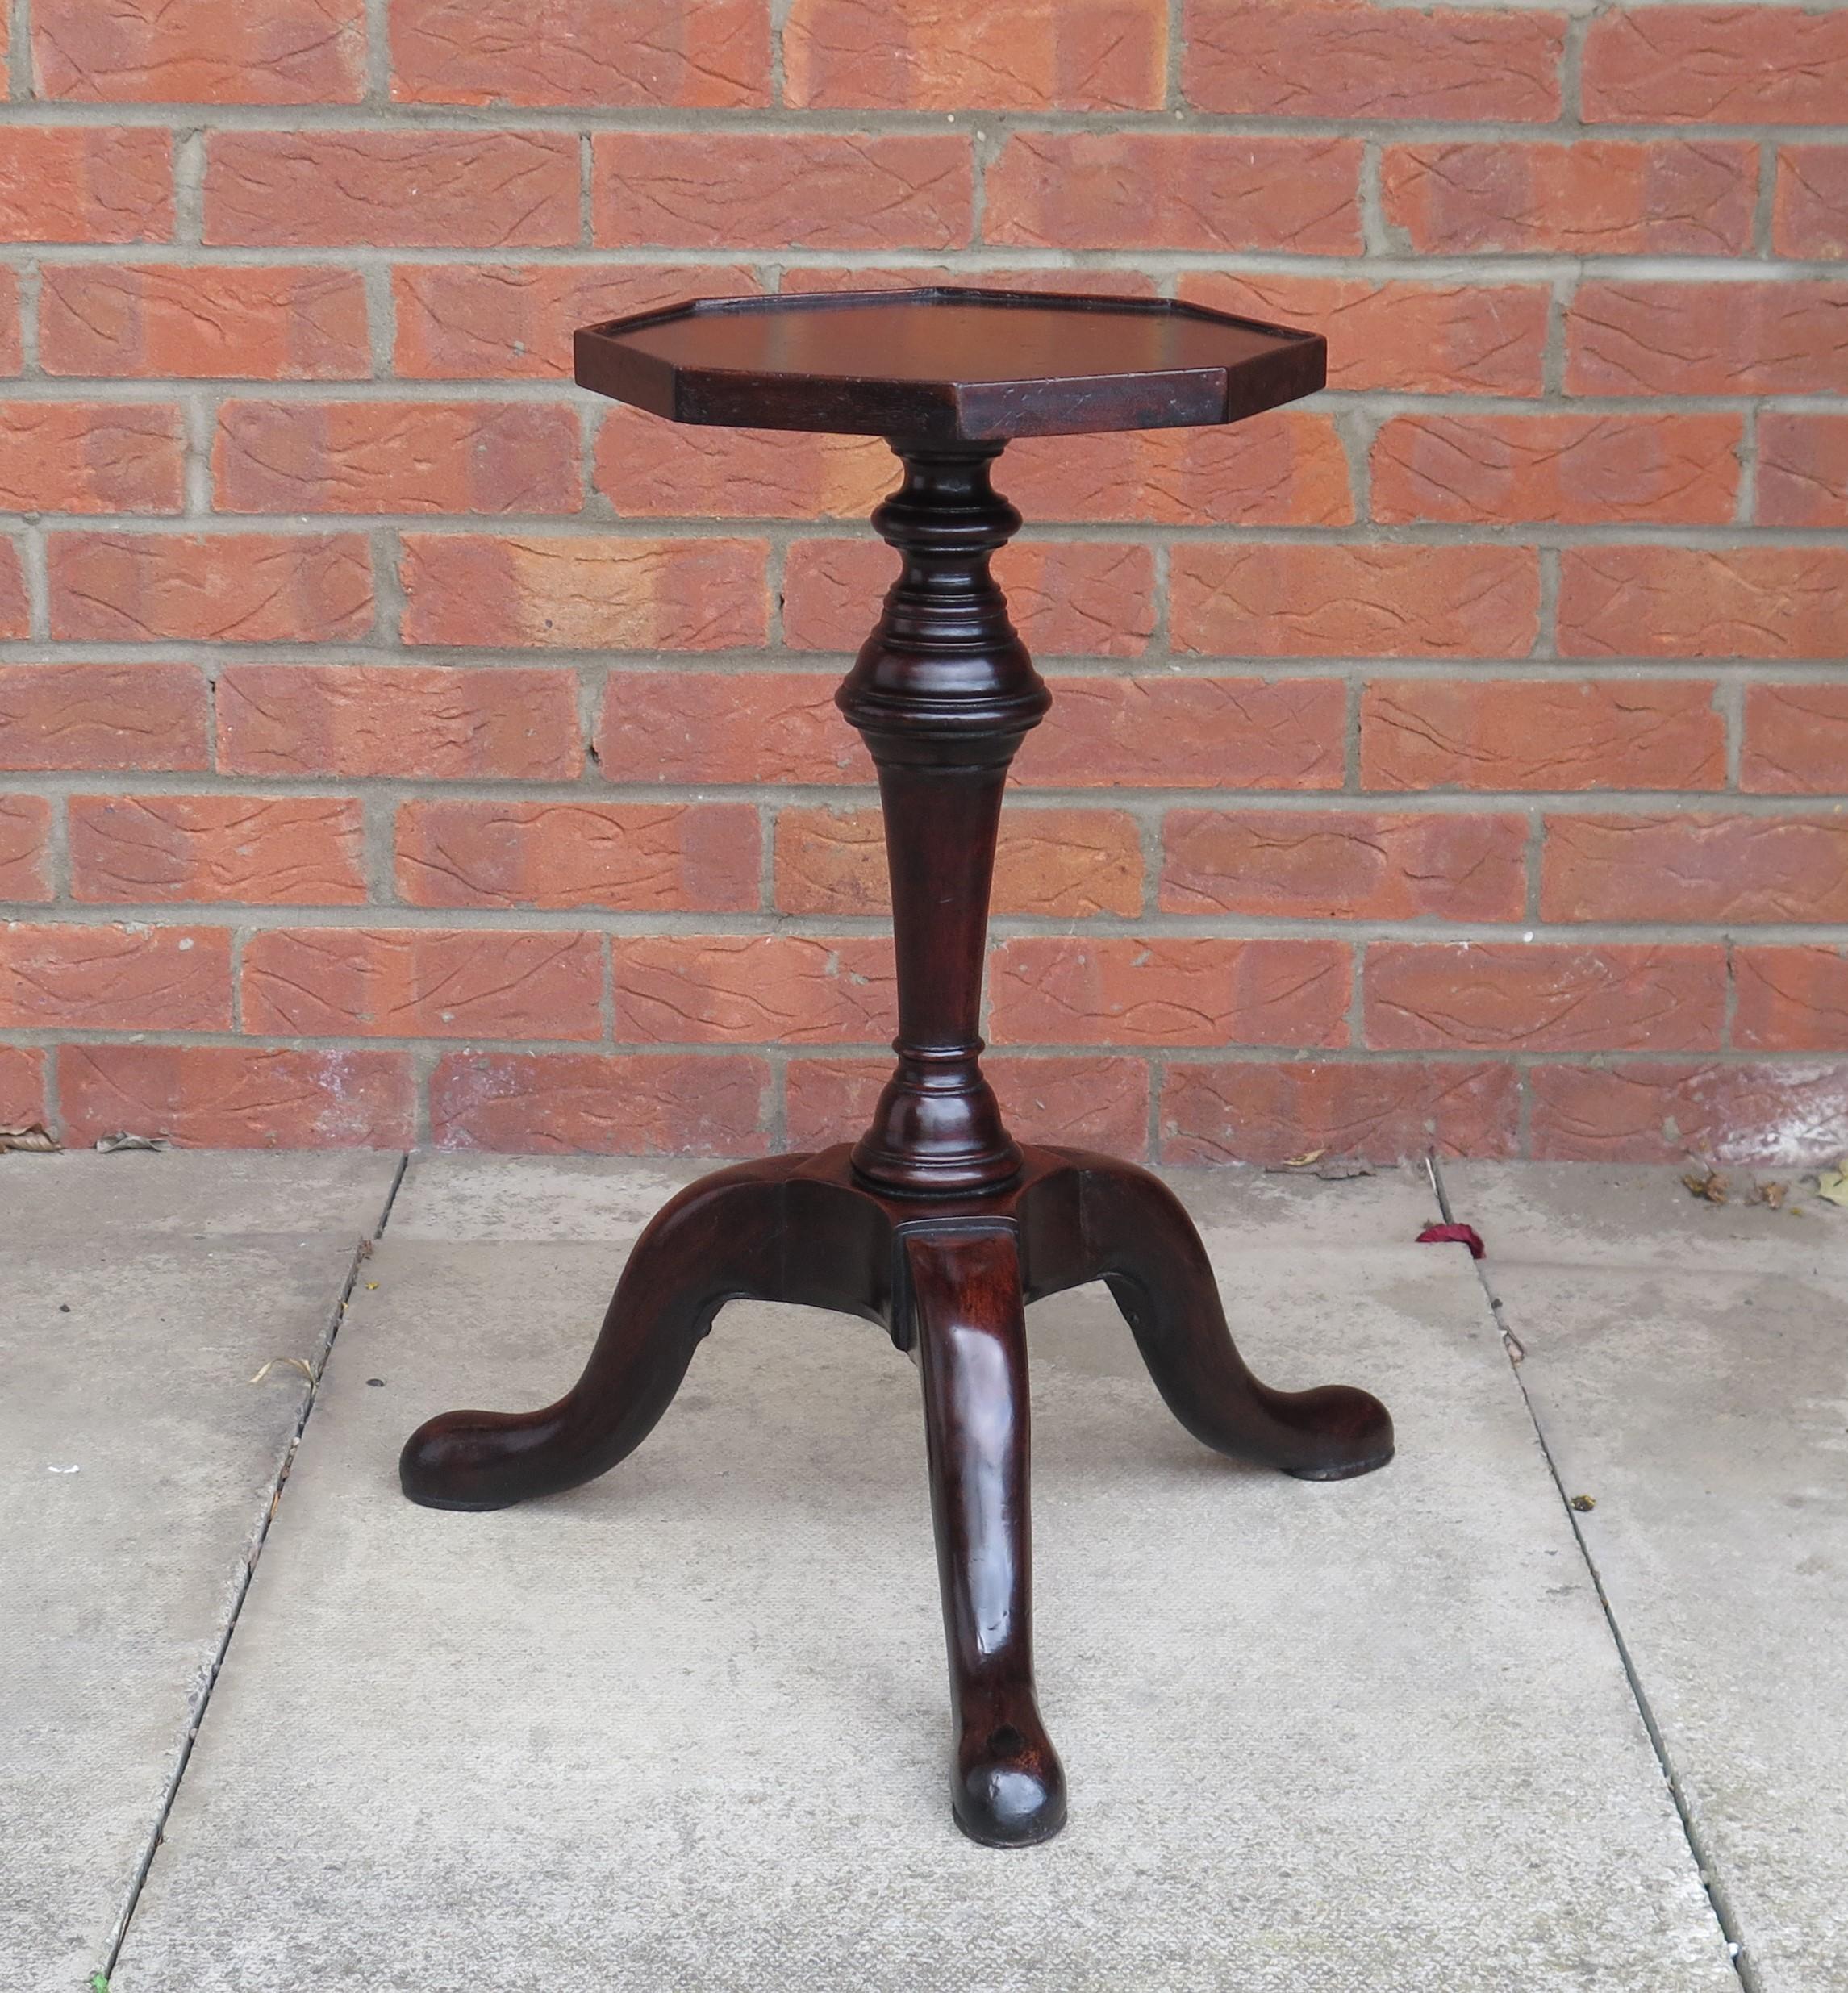 This is a rare Georgian Kettle or Candle Stand made from mahogany in the early to mid-18th century, George II period, circa 1745 or possibly earlier in the 18th century.

Candle stands of this age are rare and hard to find.
The piece is very well